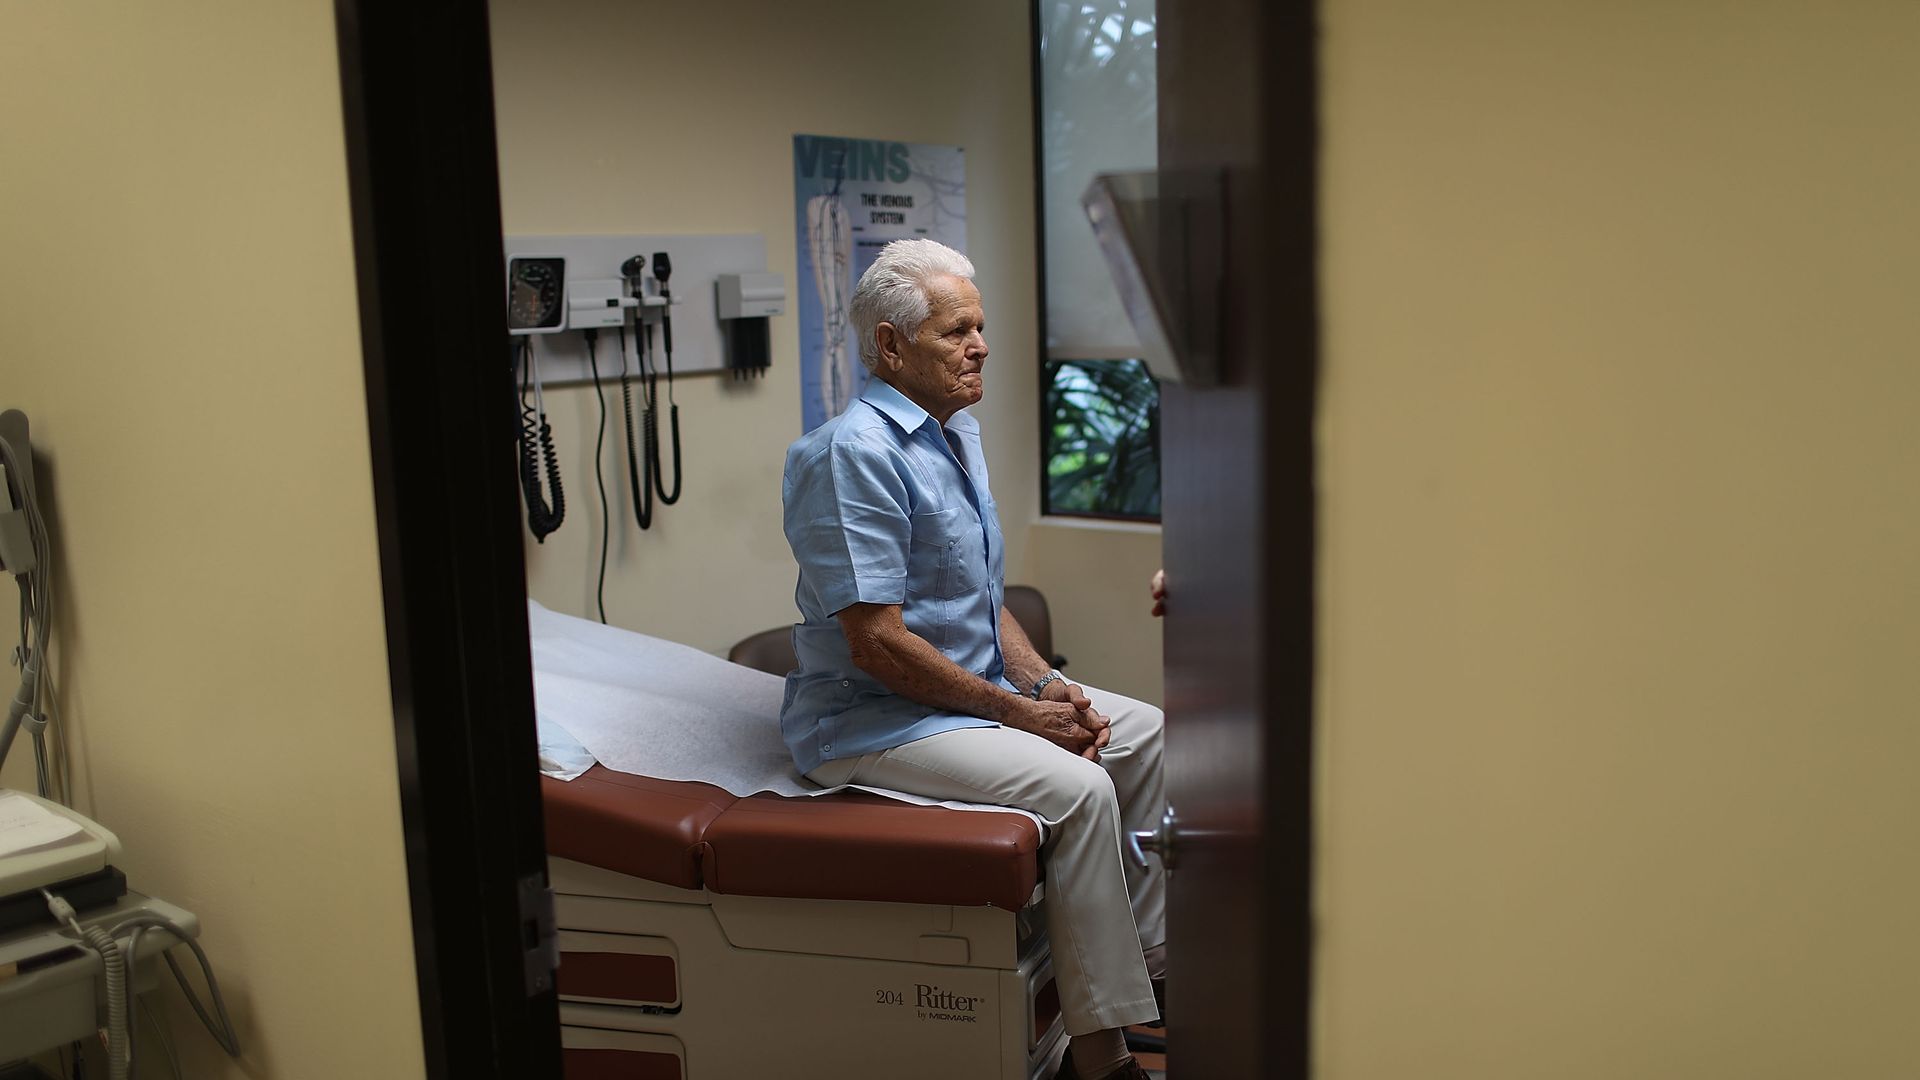 An elderly patients sits in a hospital exam room.